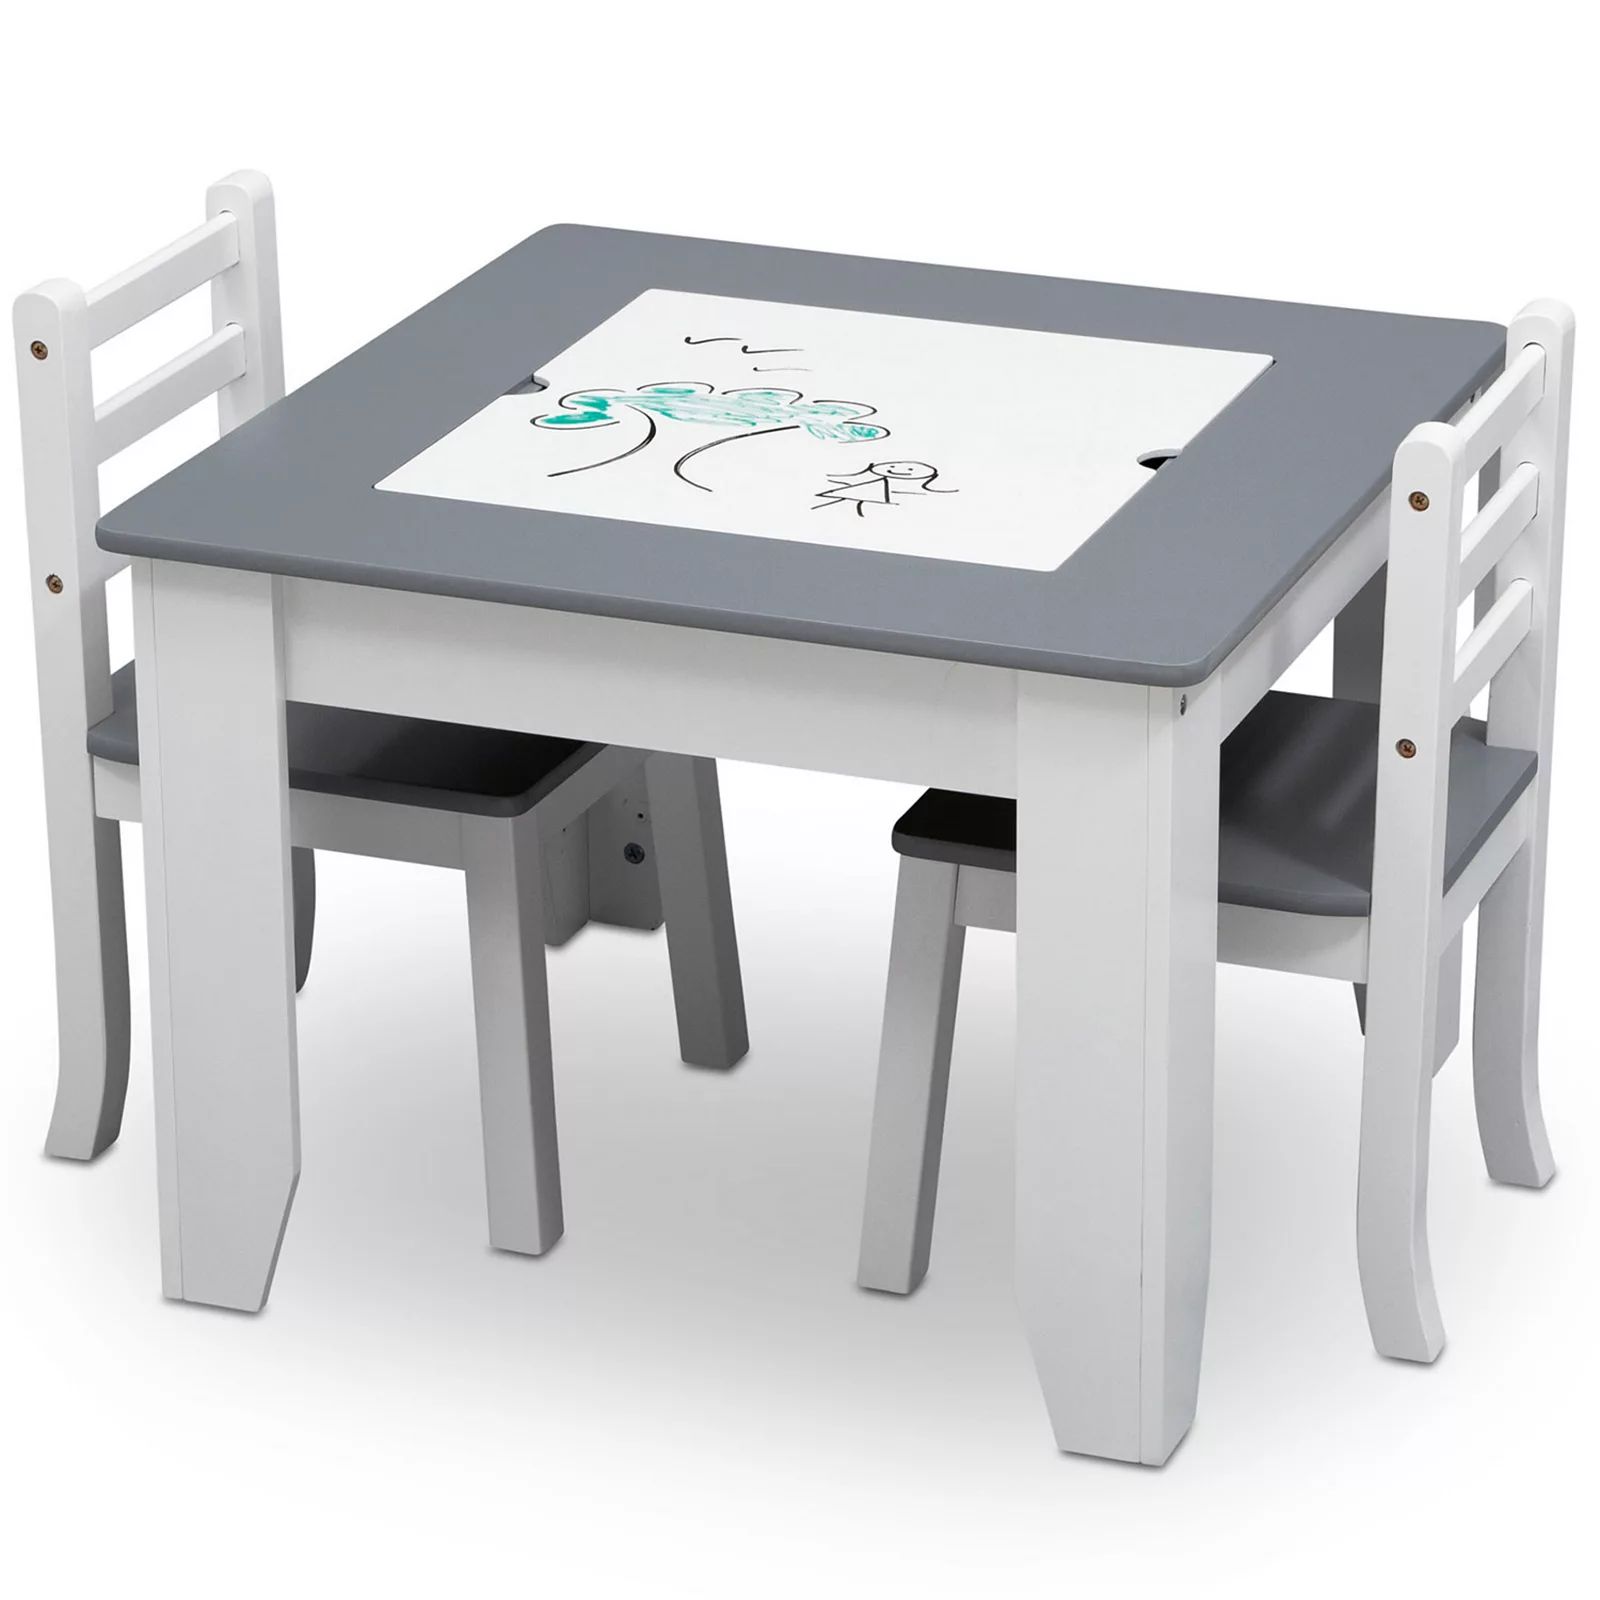 Delta Children Chelsea Wood Table and Chair Set, Grey | Kohl's